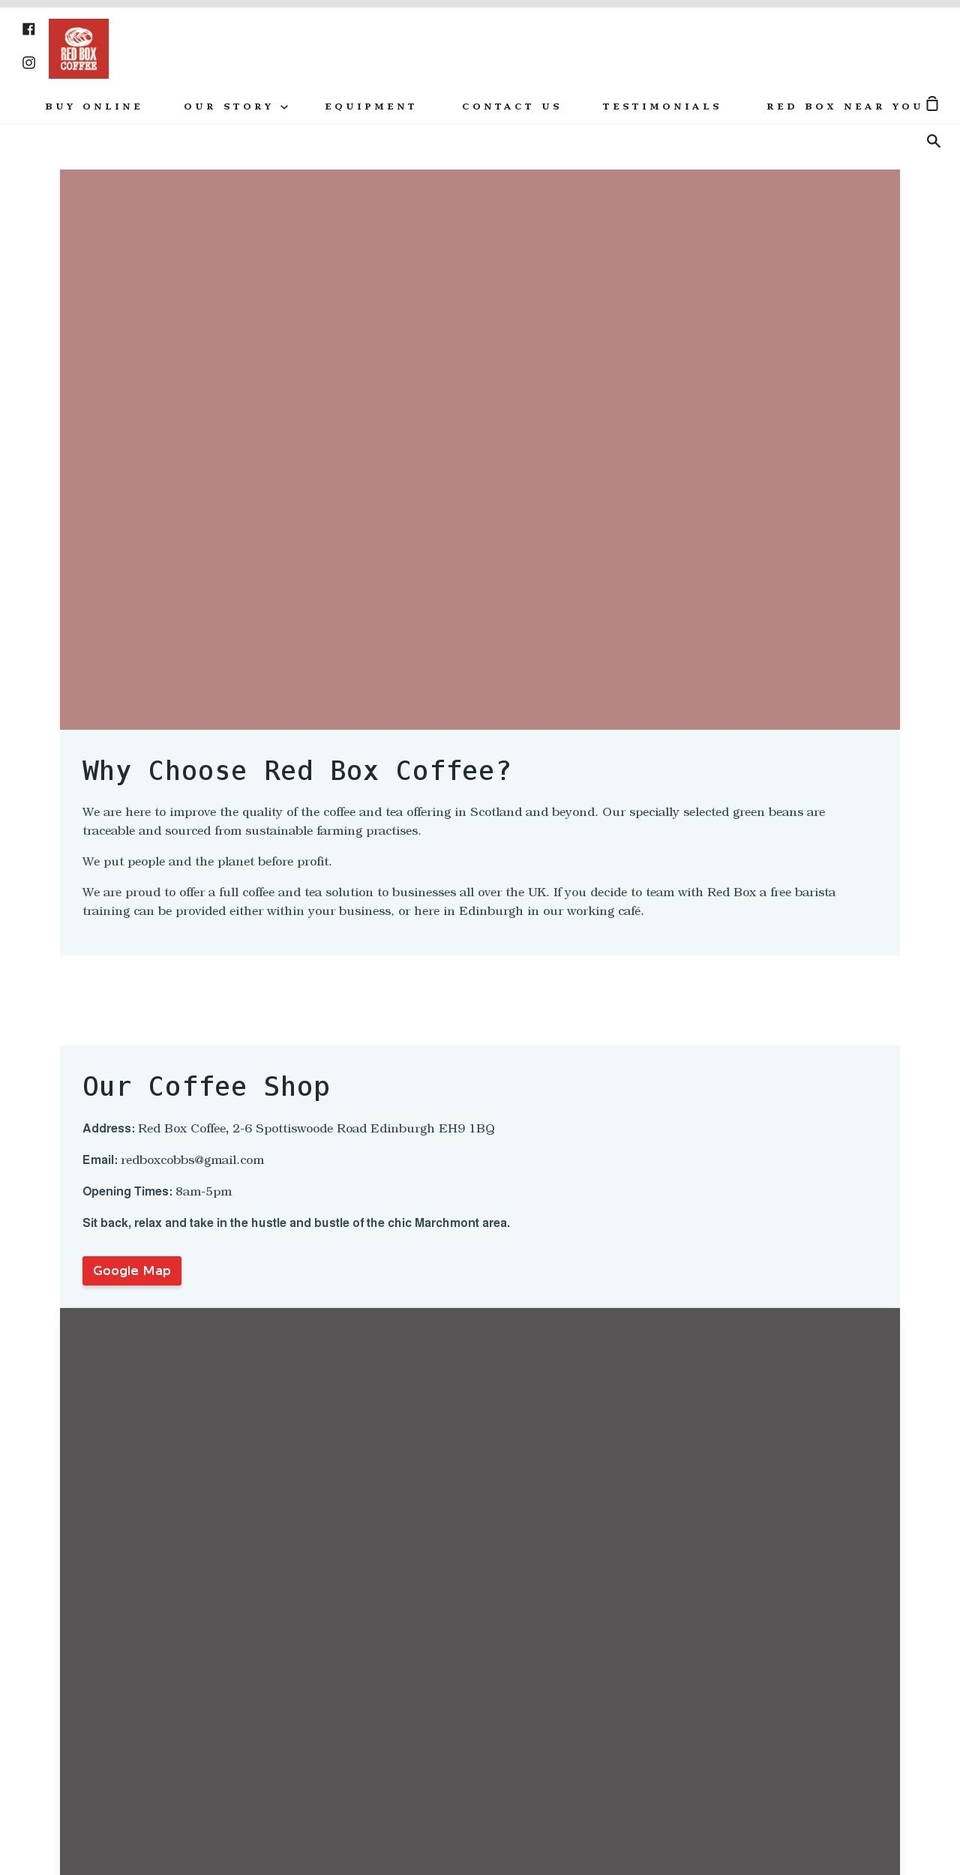 Story Shopify theme site example redboxcoffee.com